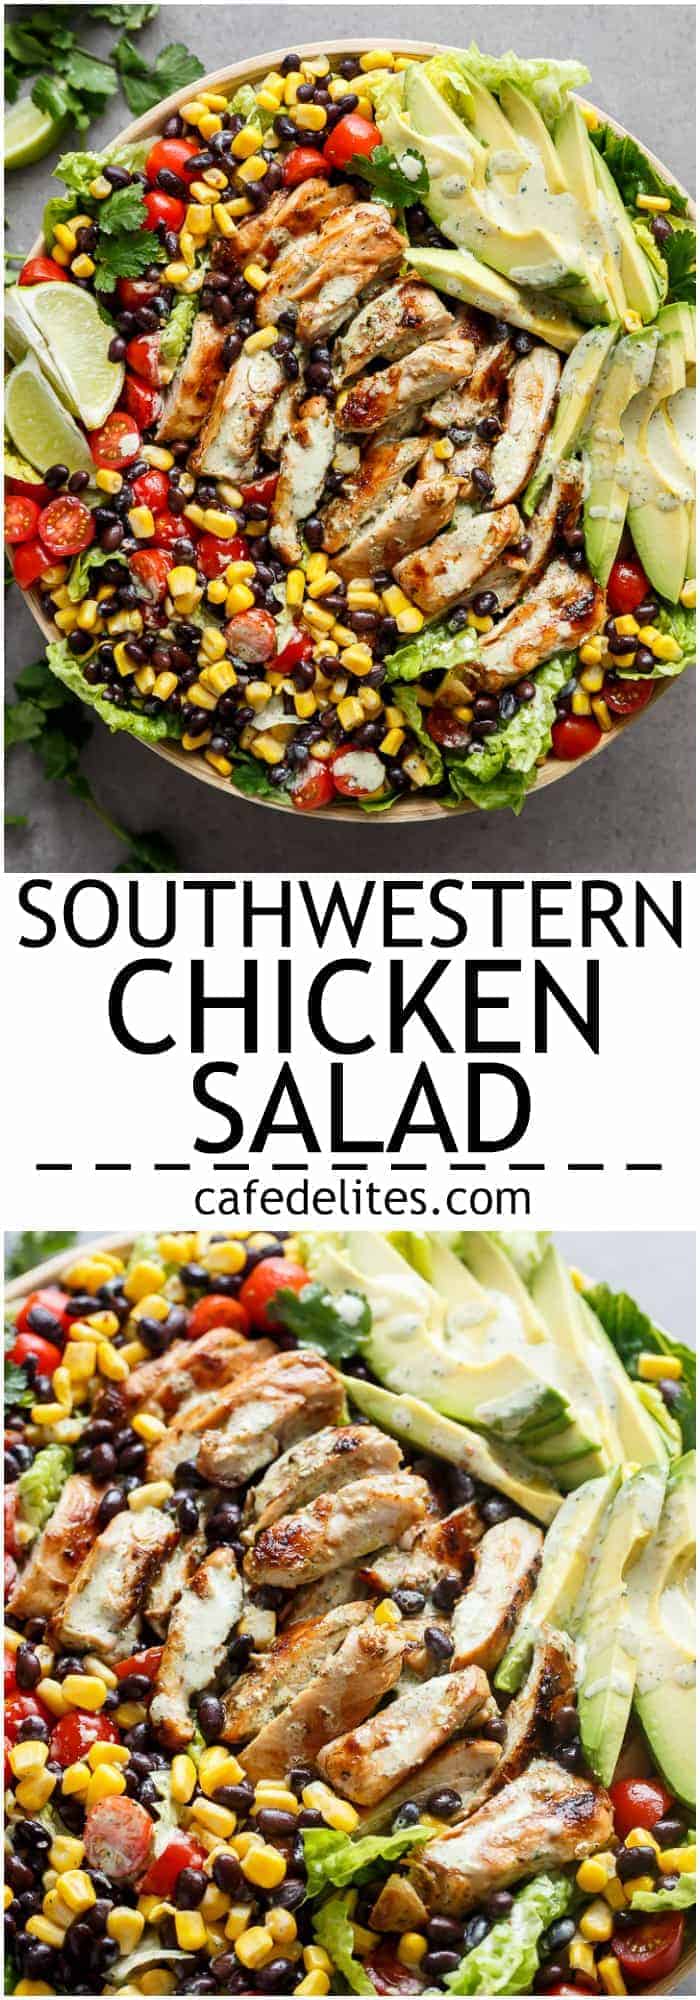 A Chili Lime Southwestern Chicken Salad with a low fat and CREAMY Cilantro Chili Lime Dressing that doubles as a marinade! | https://cafedelites.com